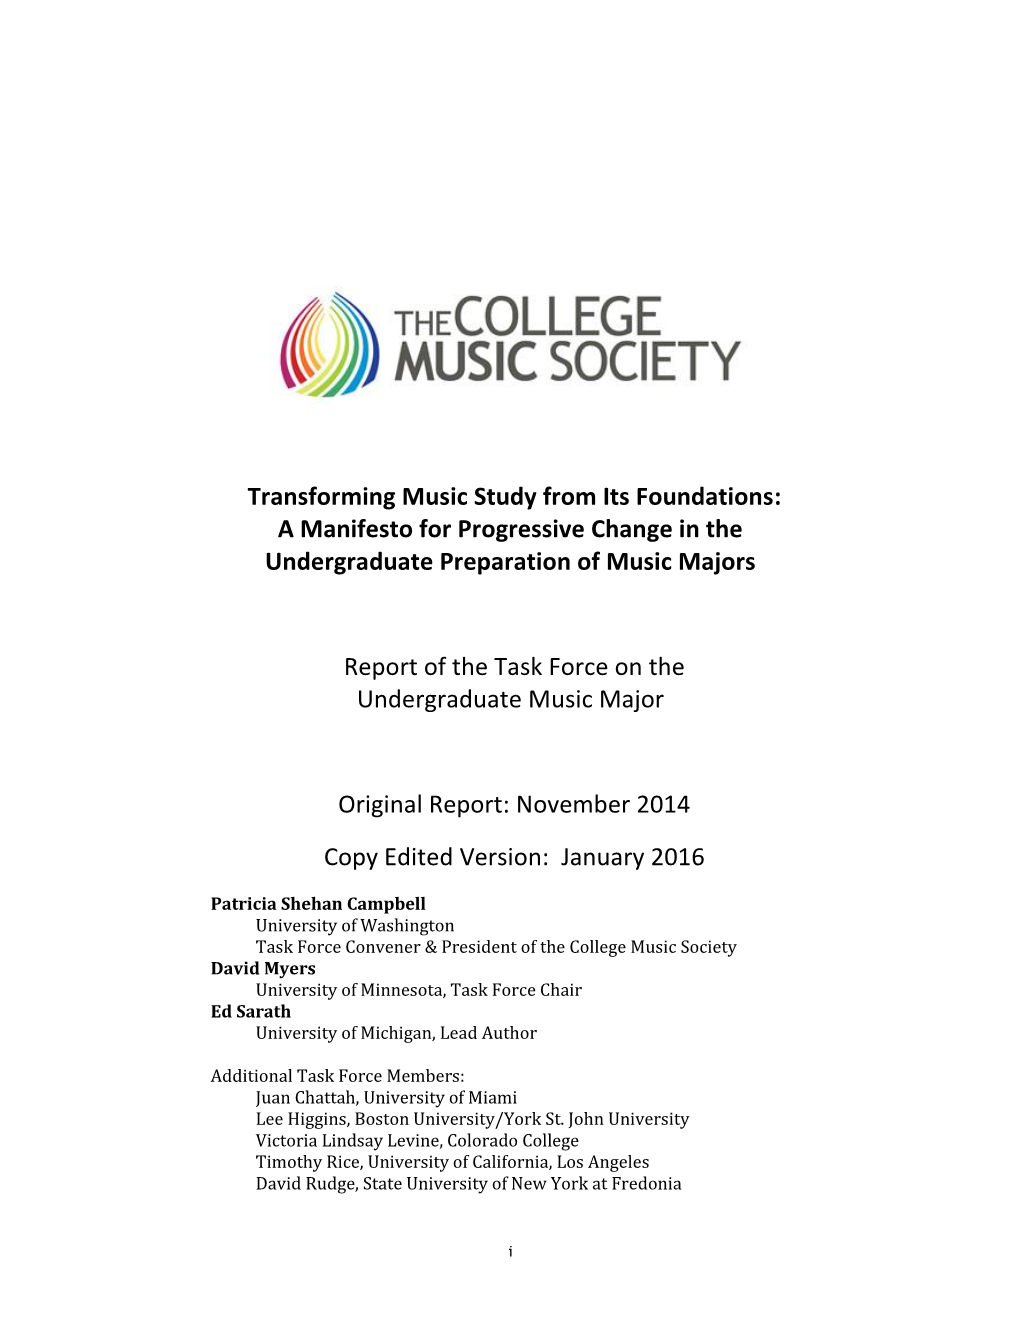 Transforming Music Study from Its Foundations: a Manifesto for Progressive Change in the Undergraduate Preparation of Music Majors